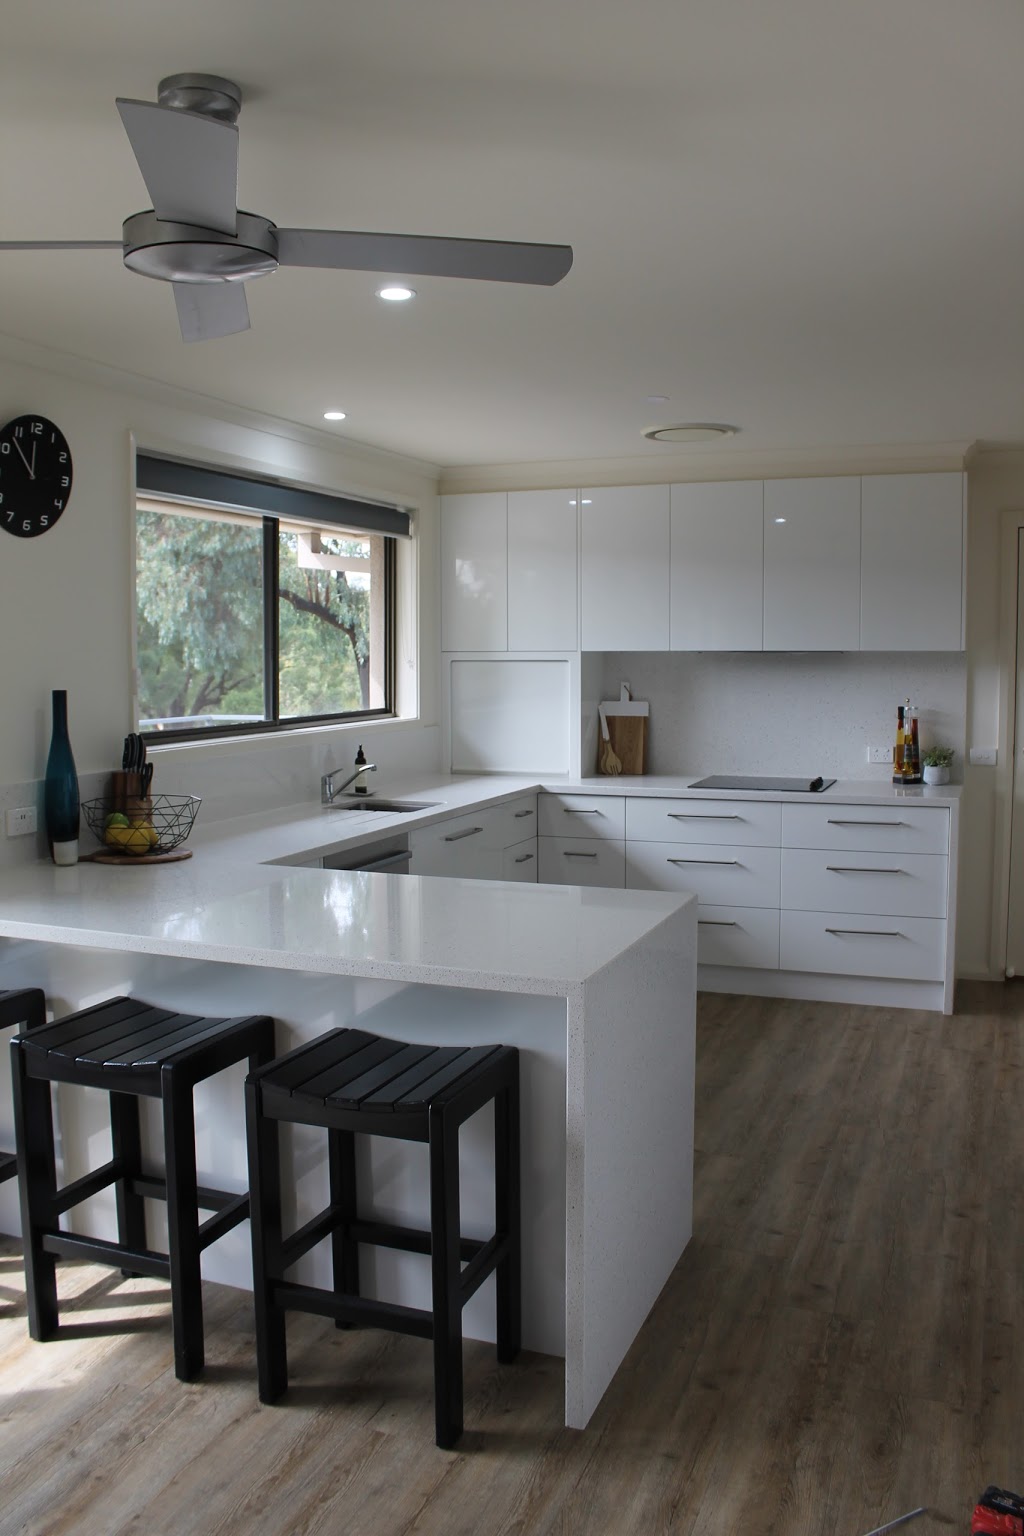 Ararat Kitchens & Joinery - Kitchens, Cabinets, Bathrooms | furniture store | 165 Moore St, Ararat VIC 3377, Australia | 0438576215 OR +61 438 576 215